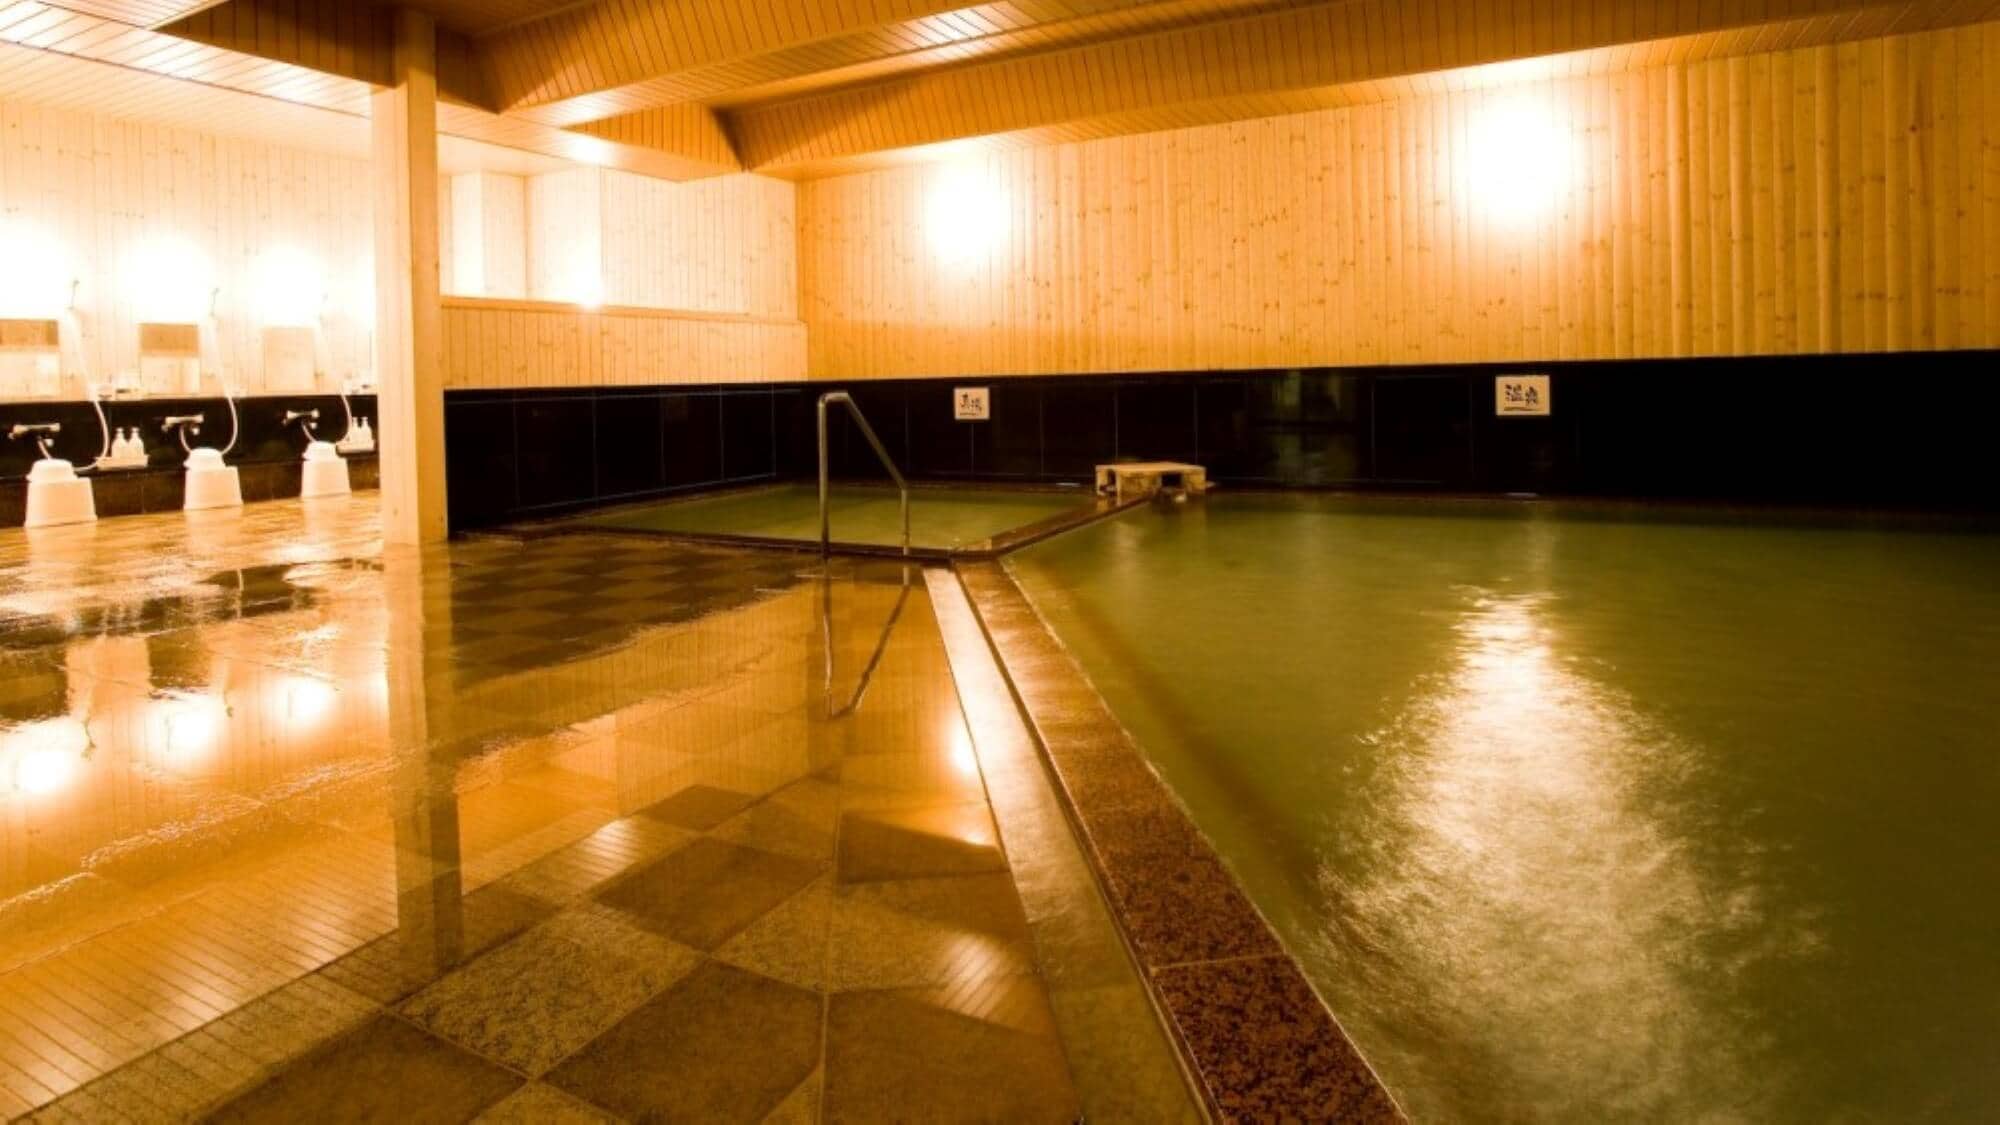 It is a natural hot spring that is 100% free flowing from the hot spring in the large communal bath.